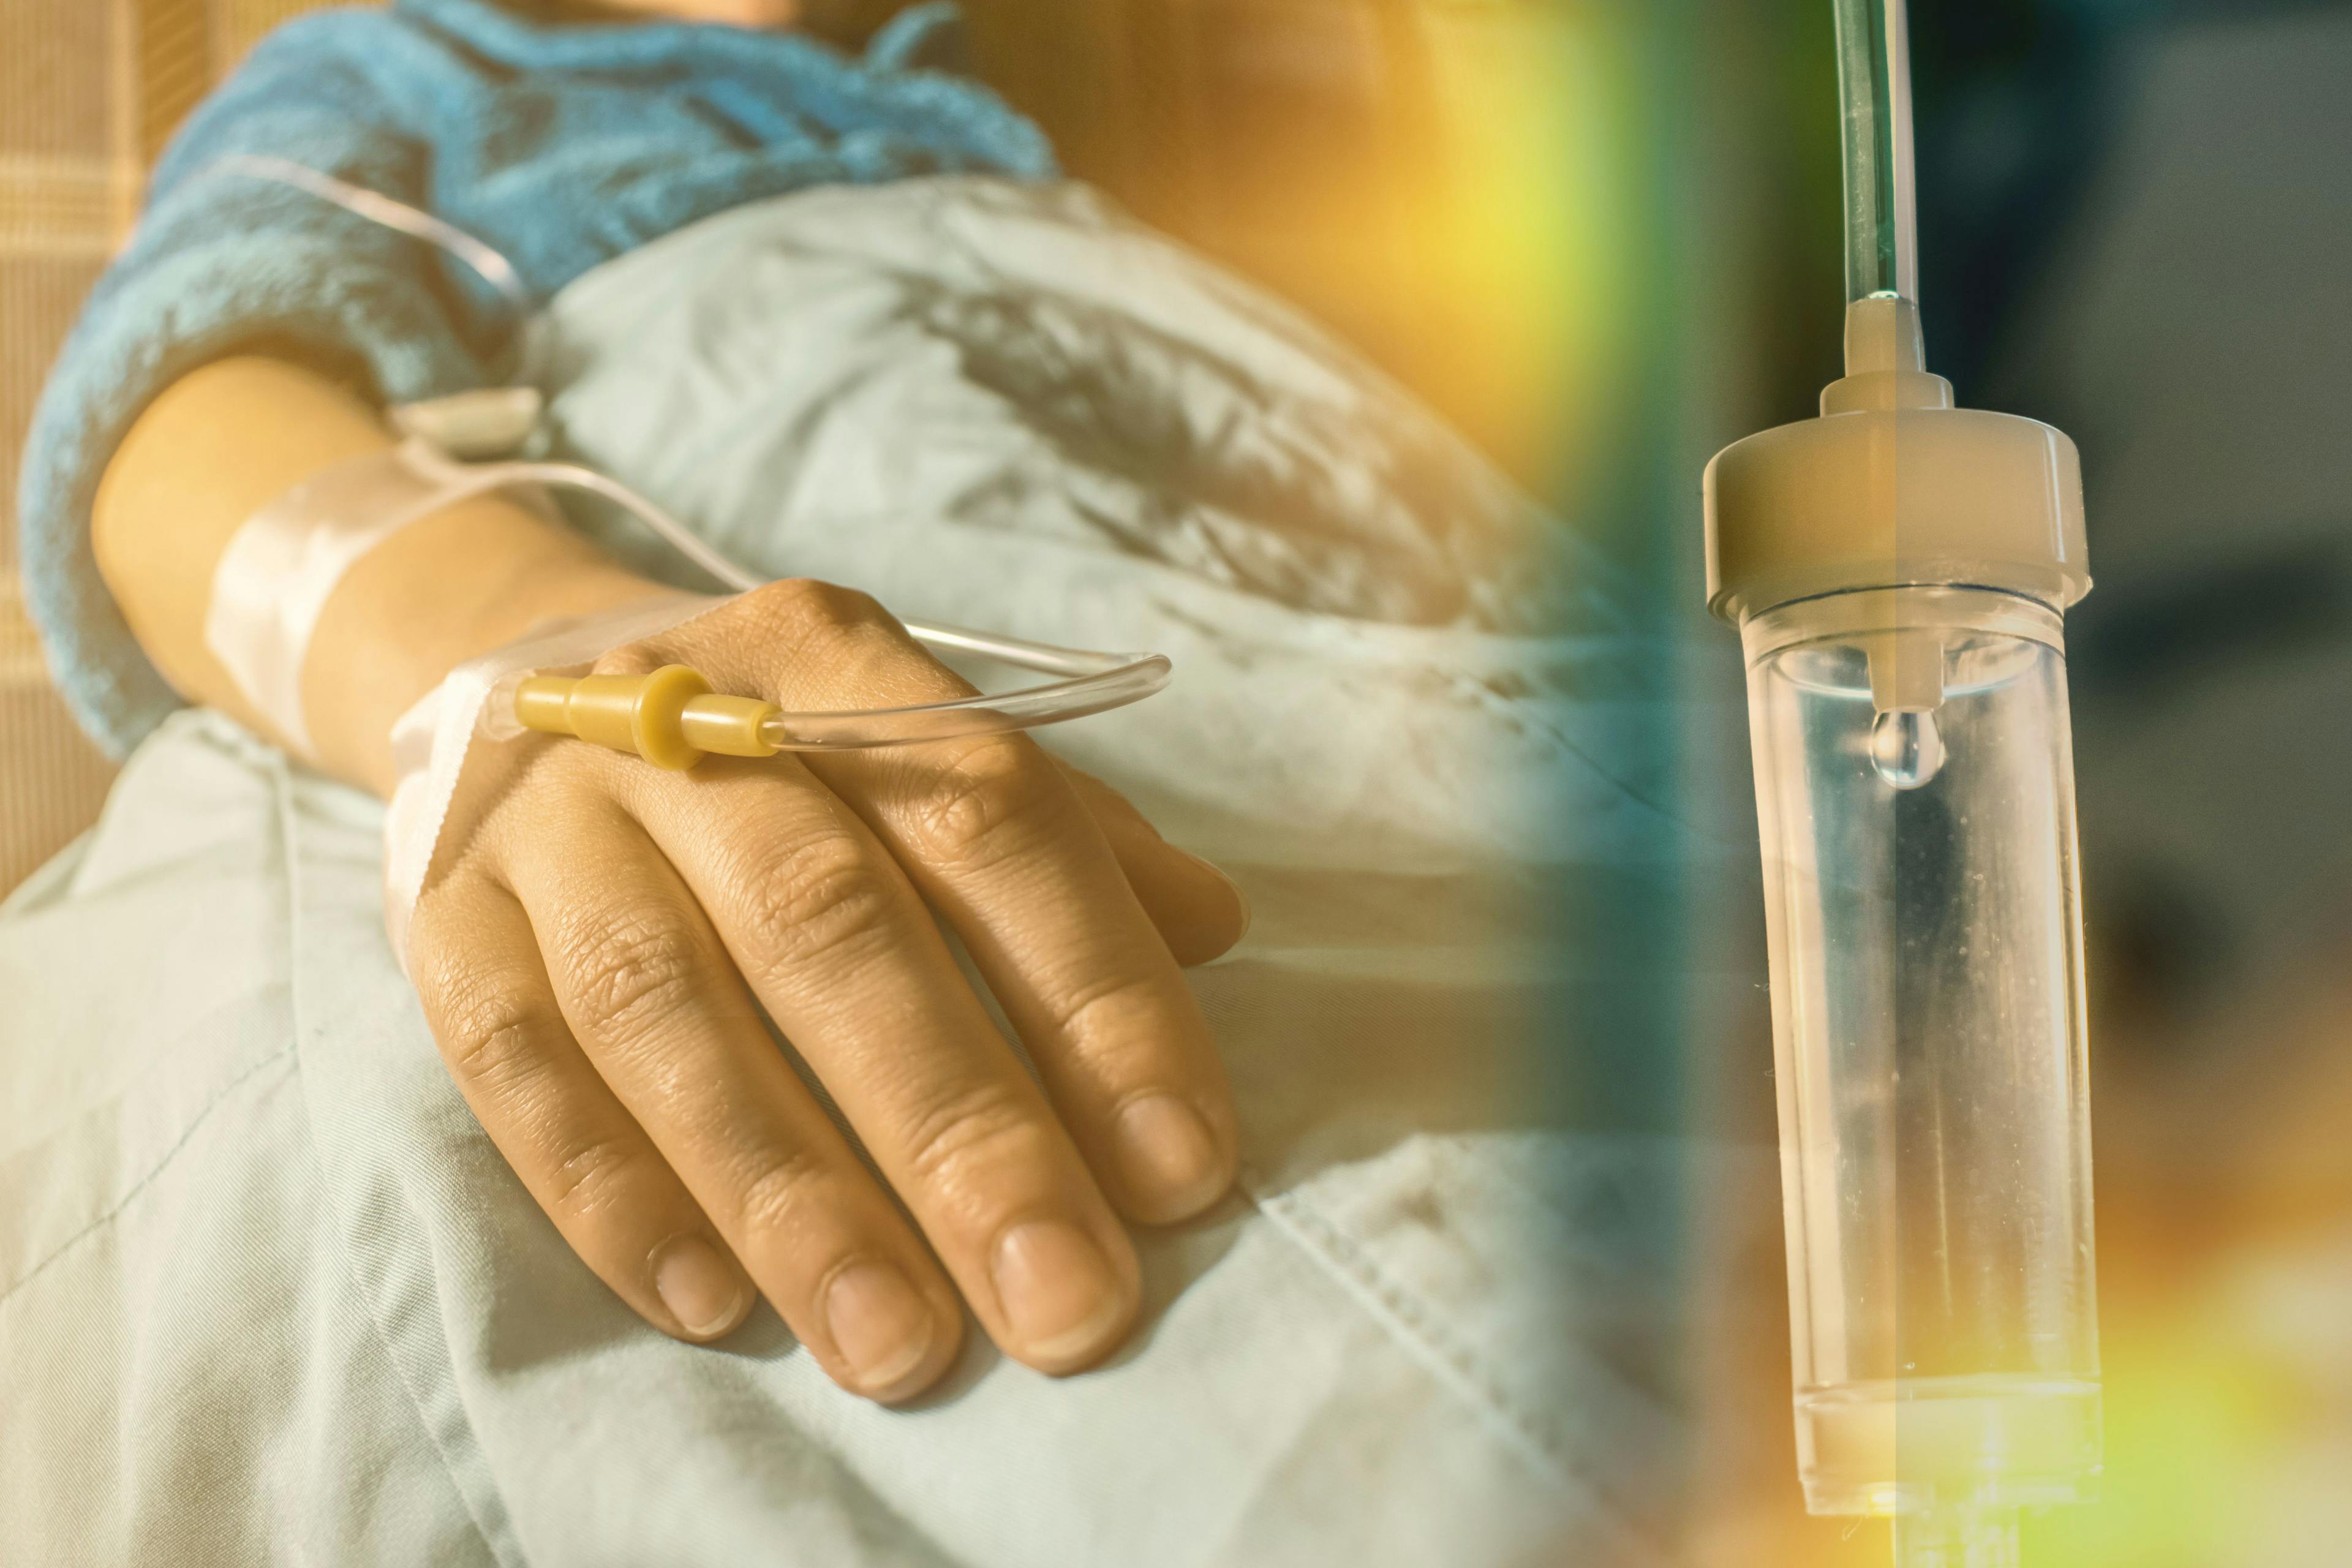 Image of a person receiving treatment via an IV.